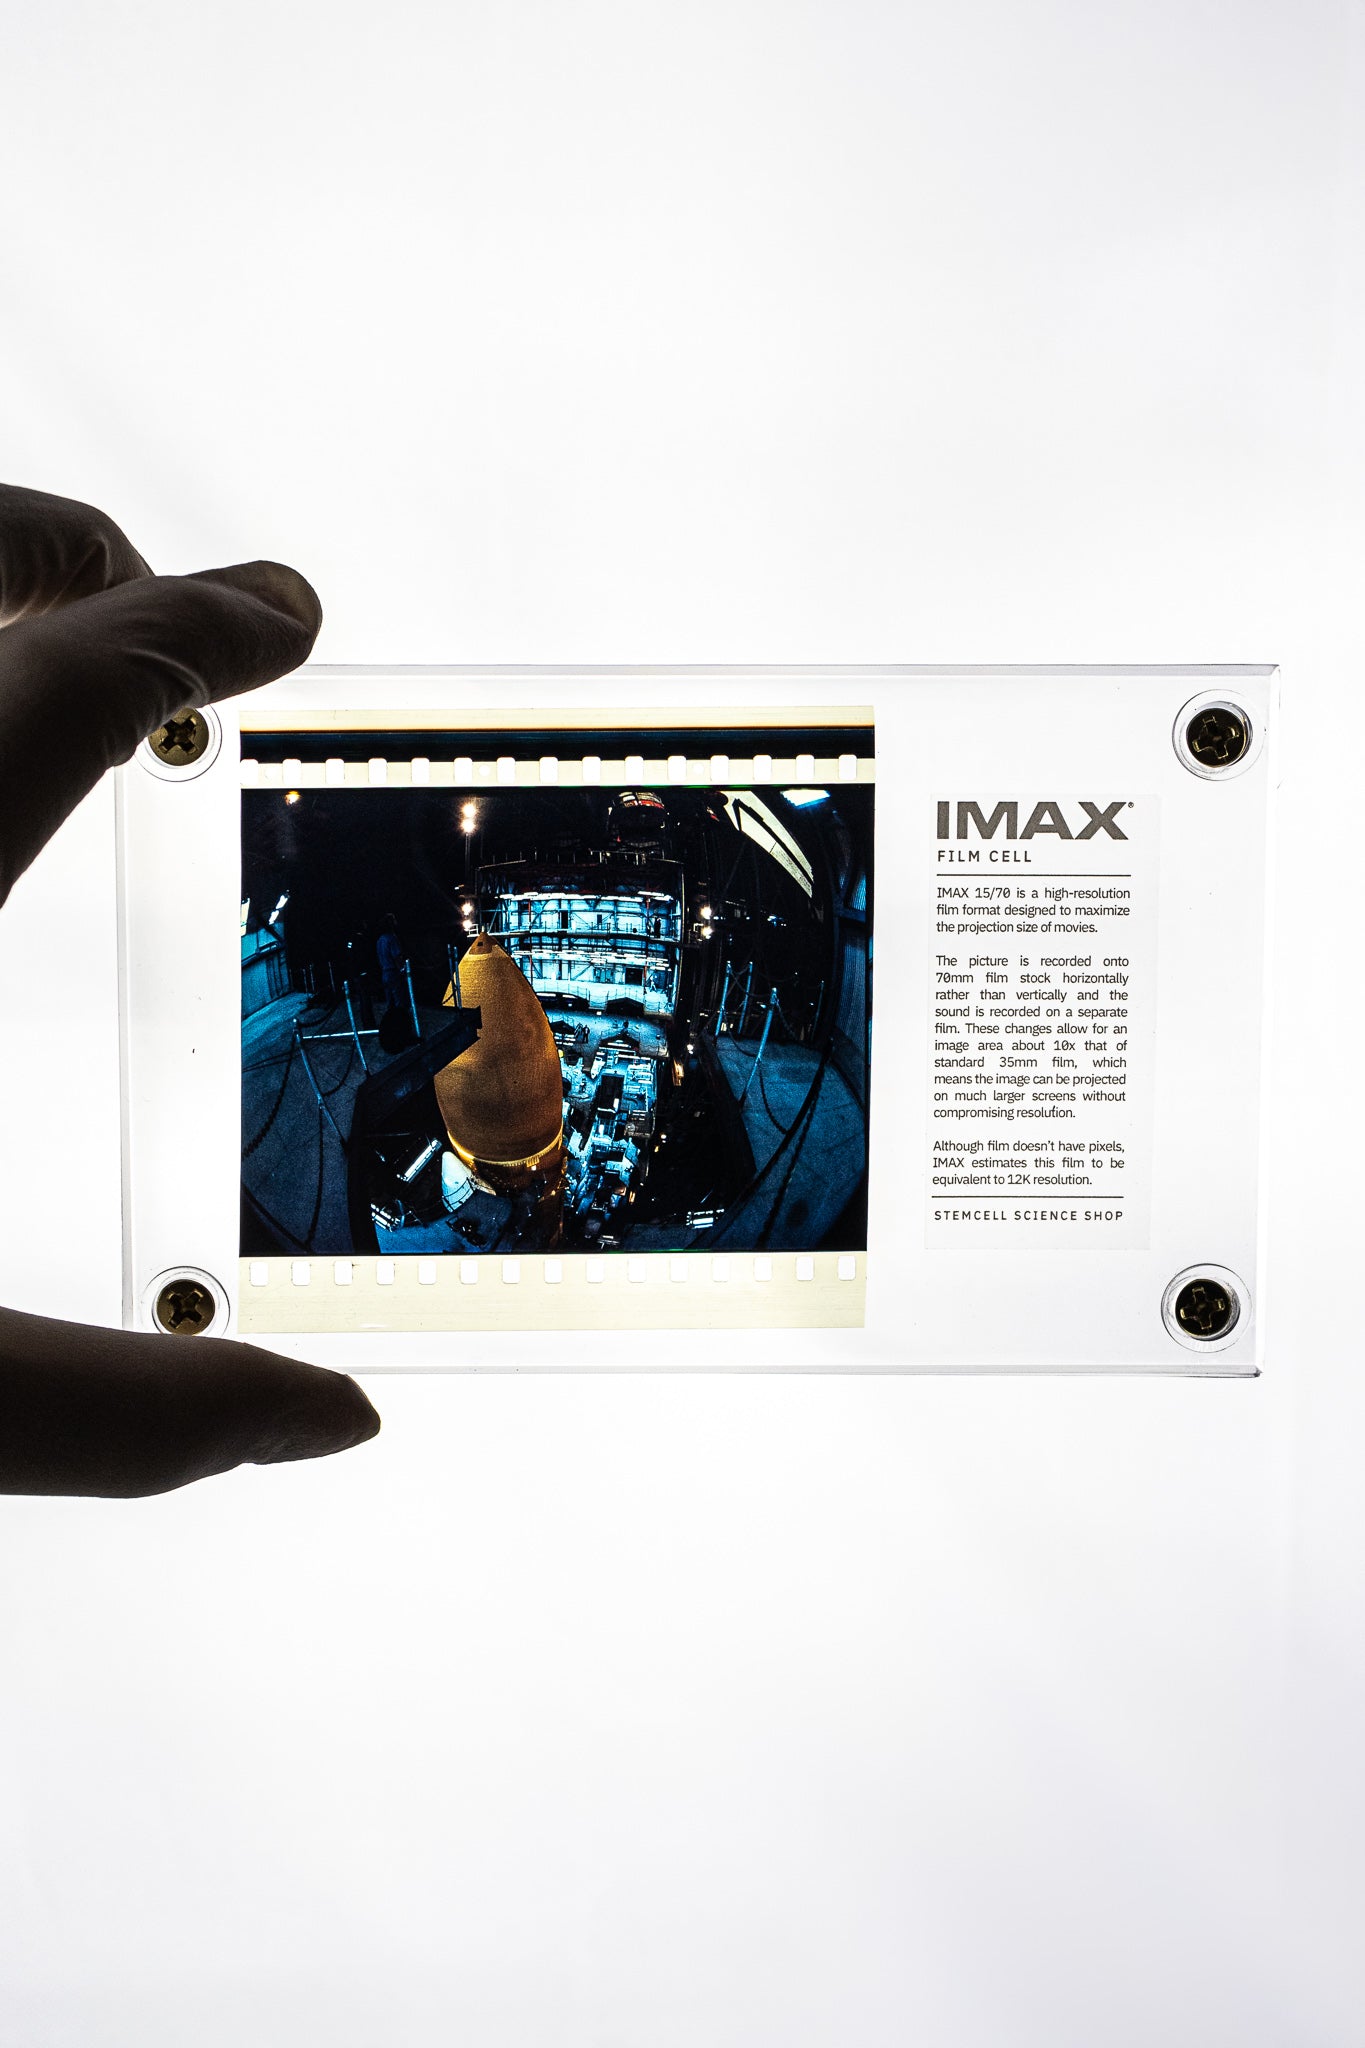 IMAX Film Cell - Stemcell Science Shop